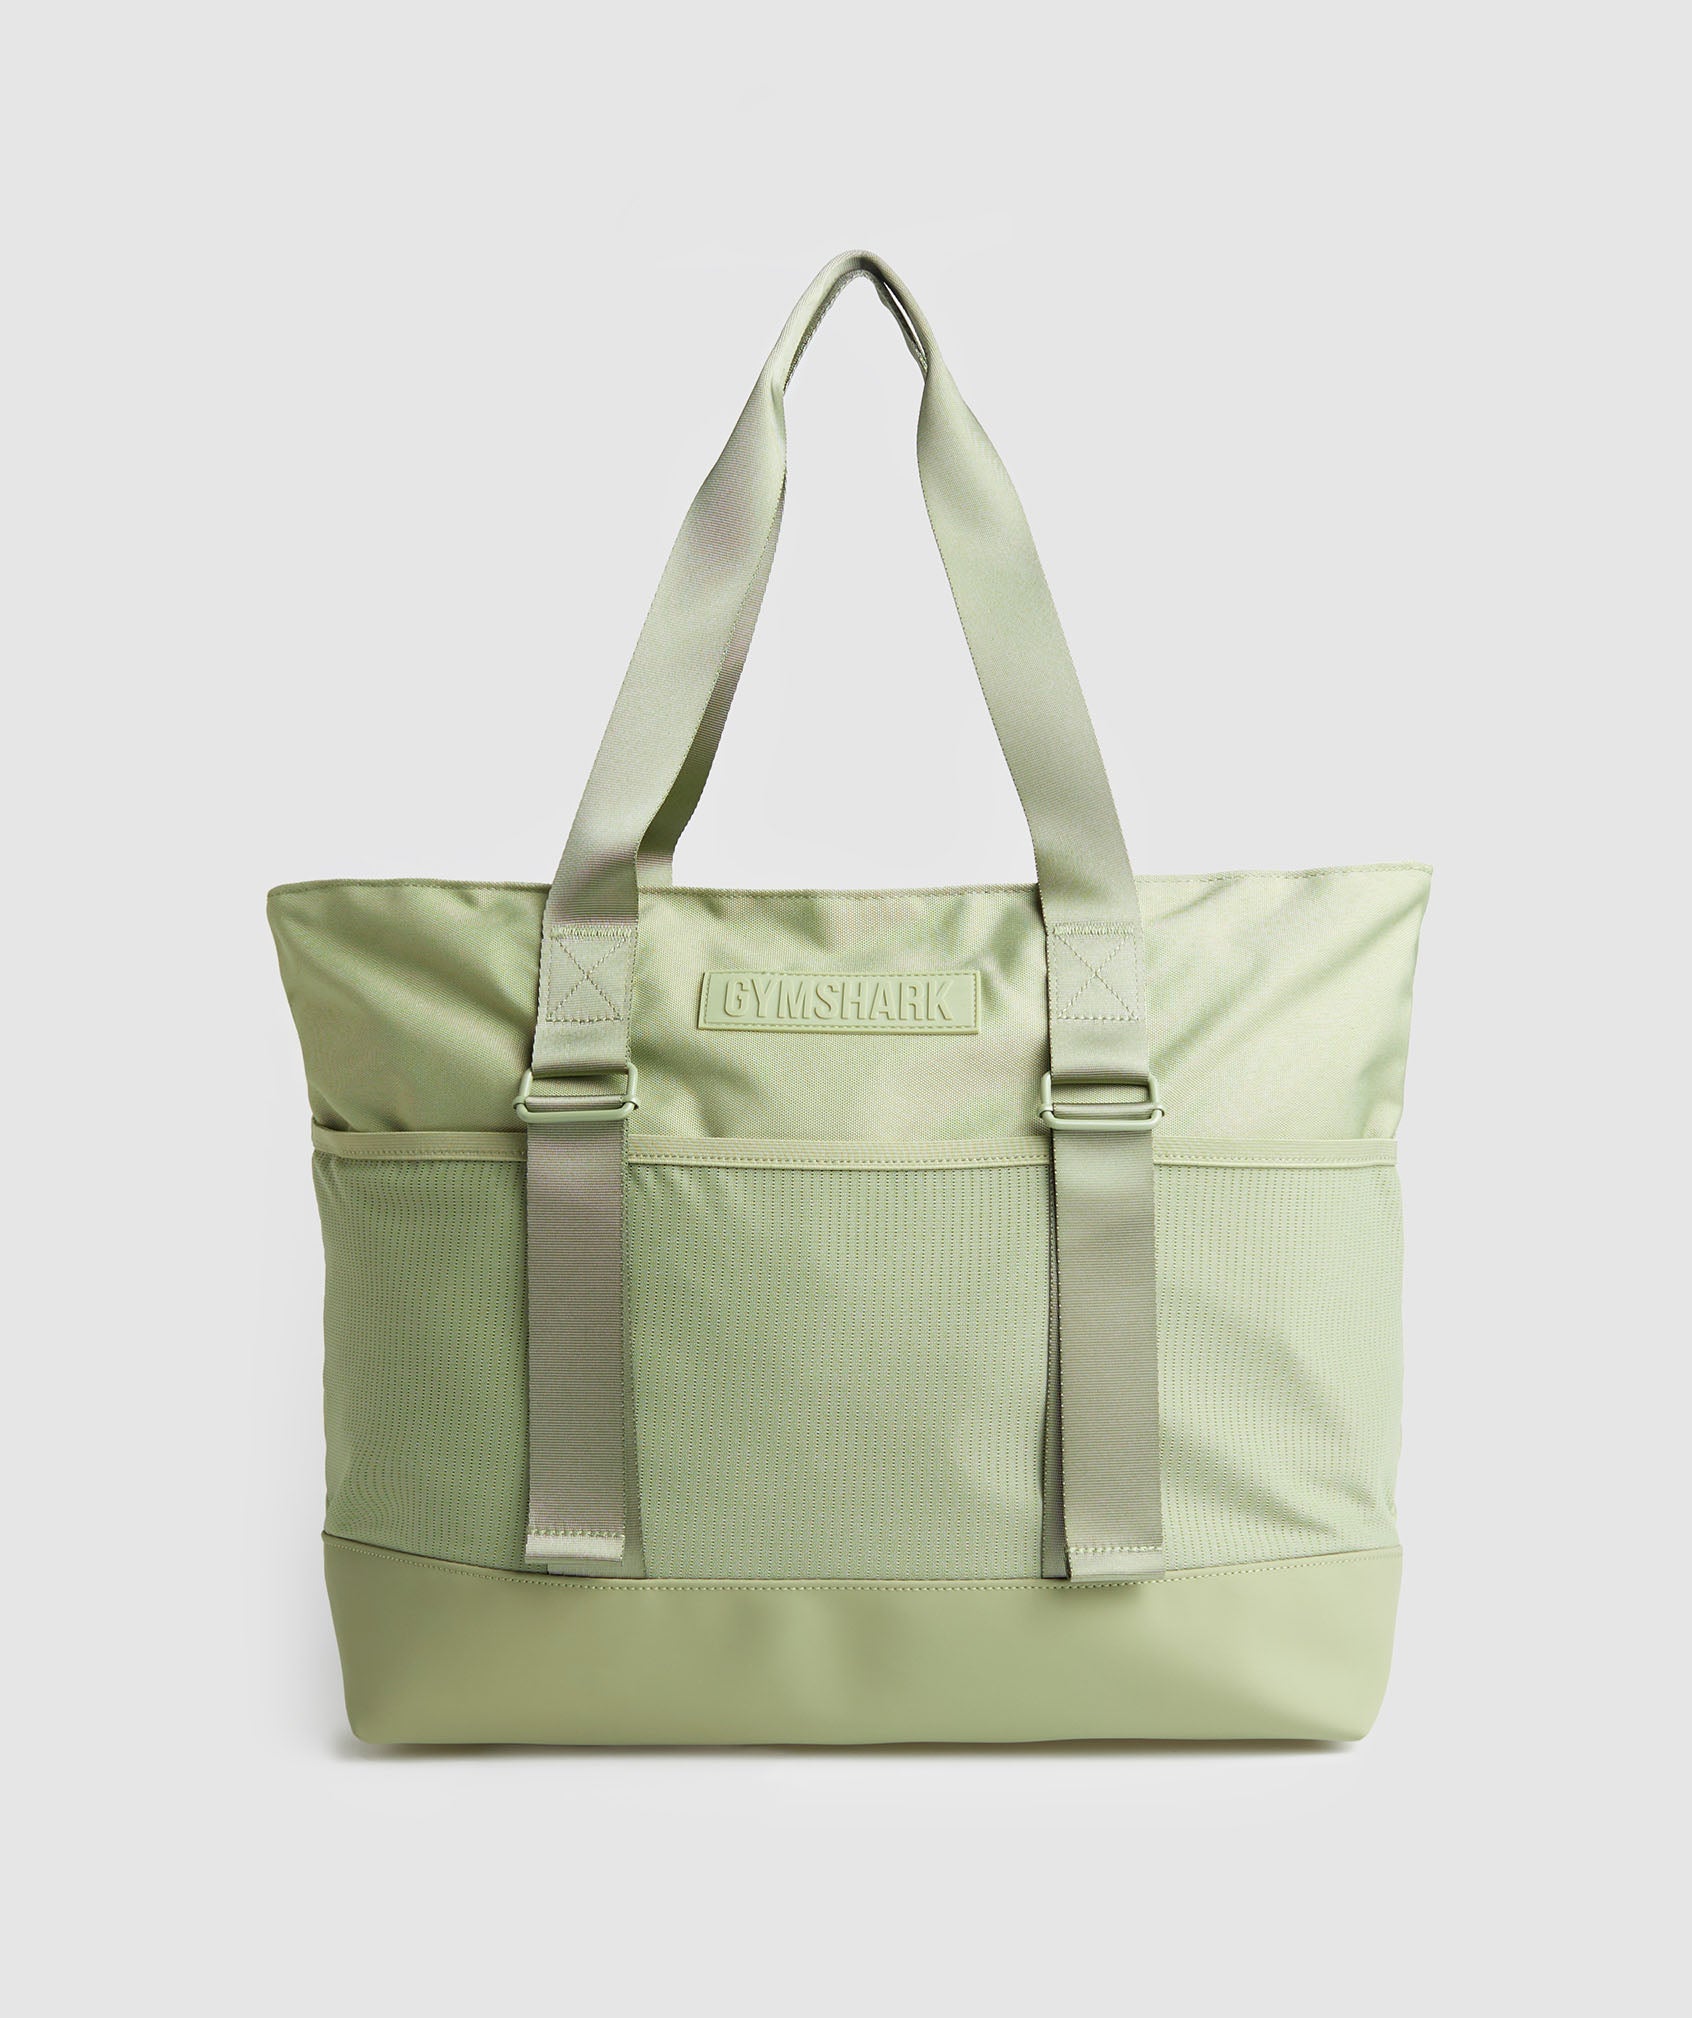 Everyday Tote in Natural Sage Green is out of stock